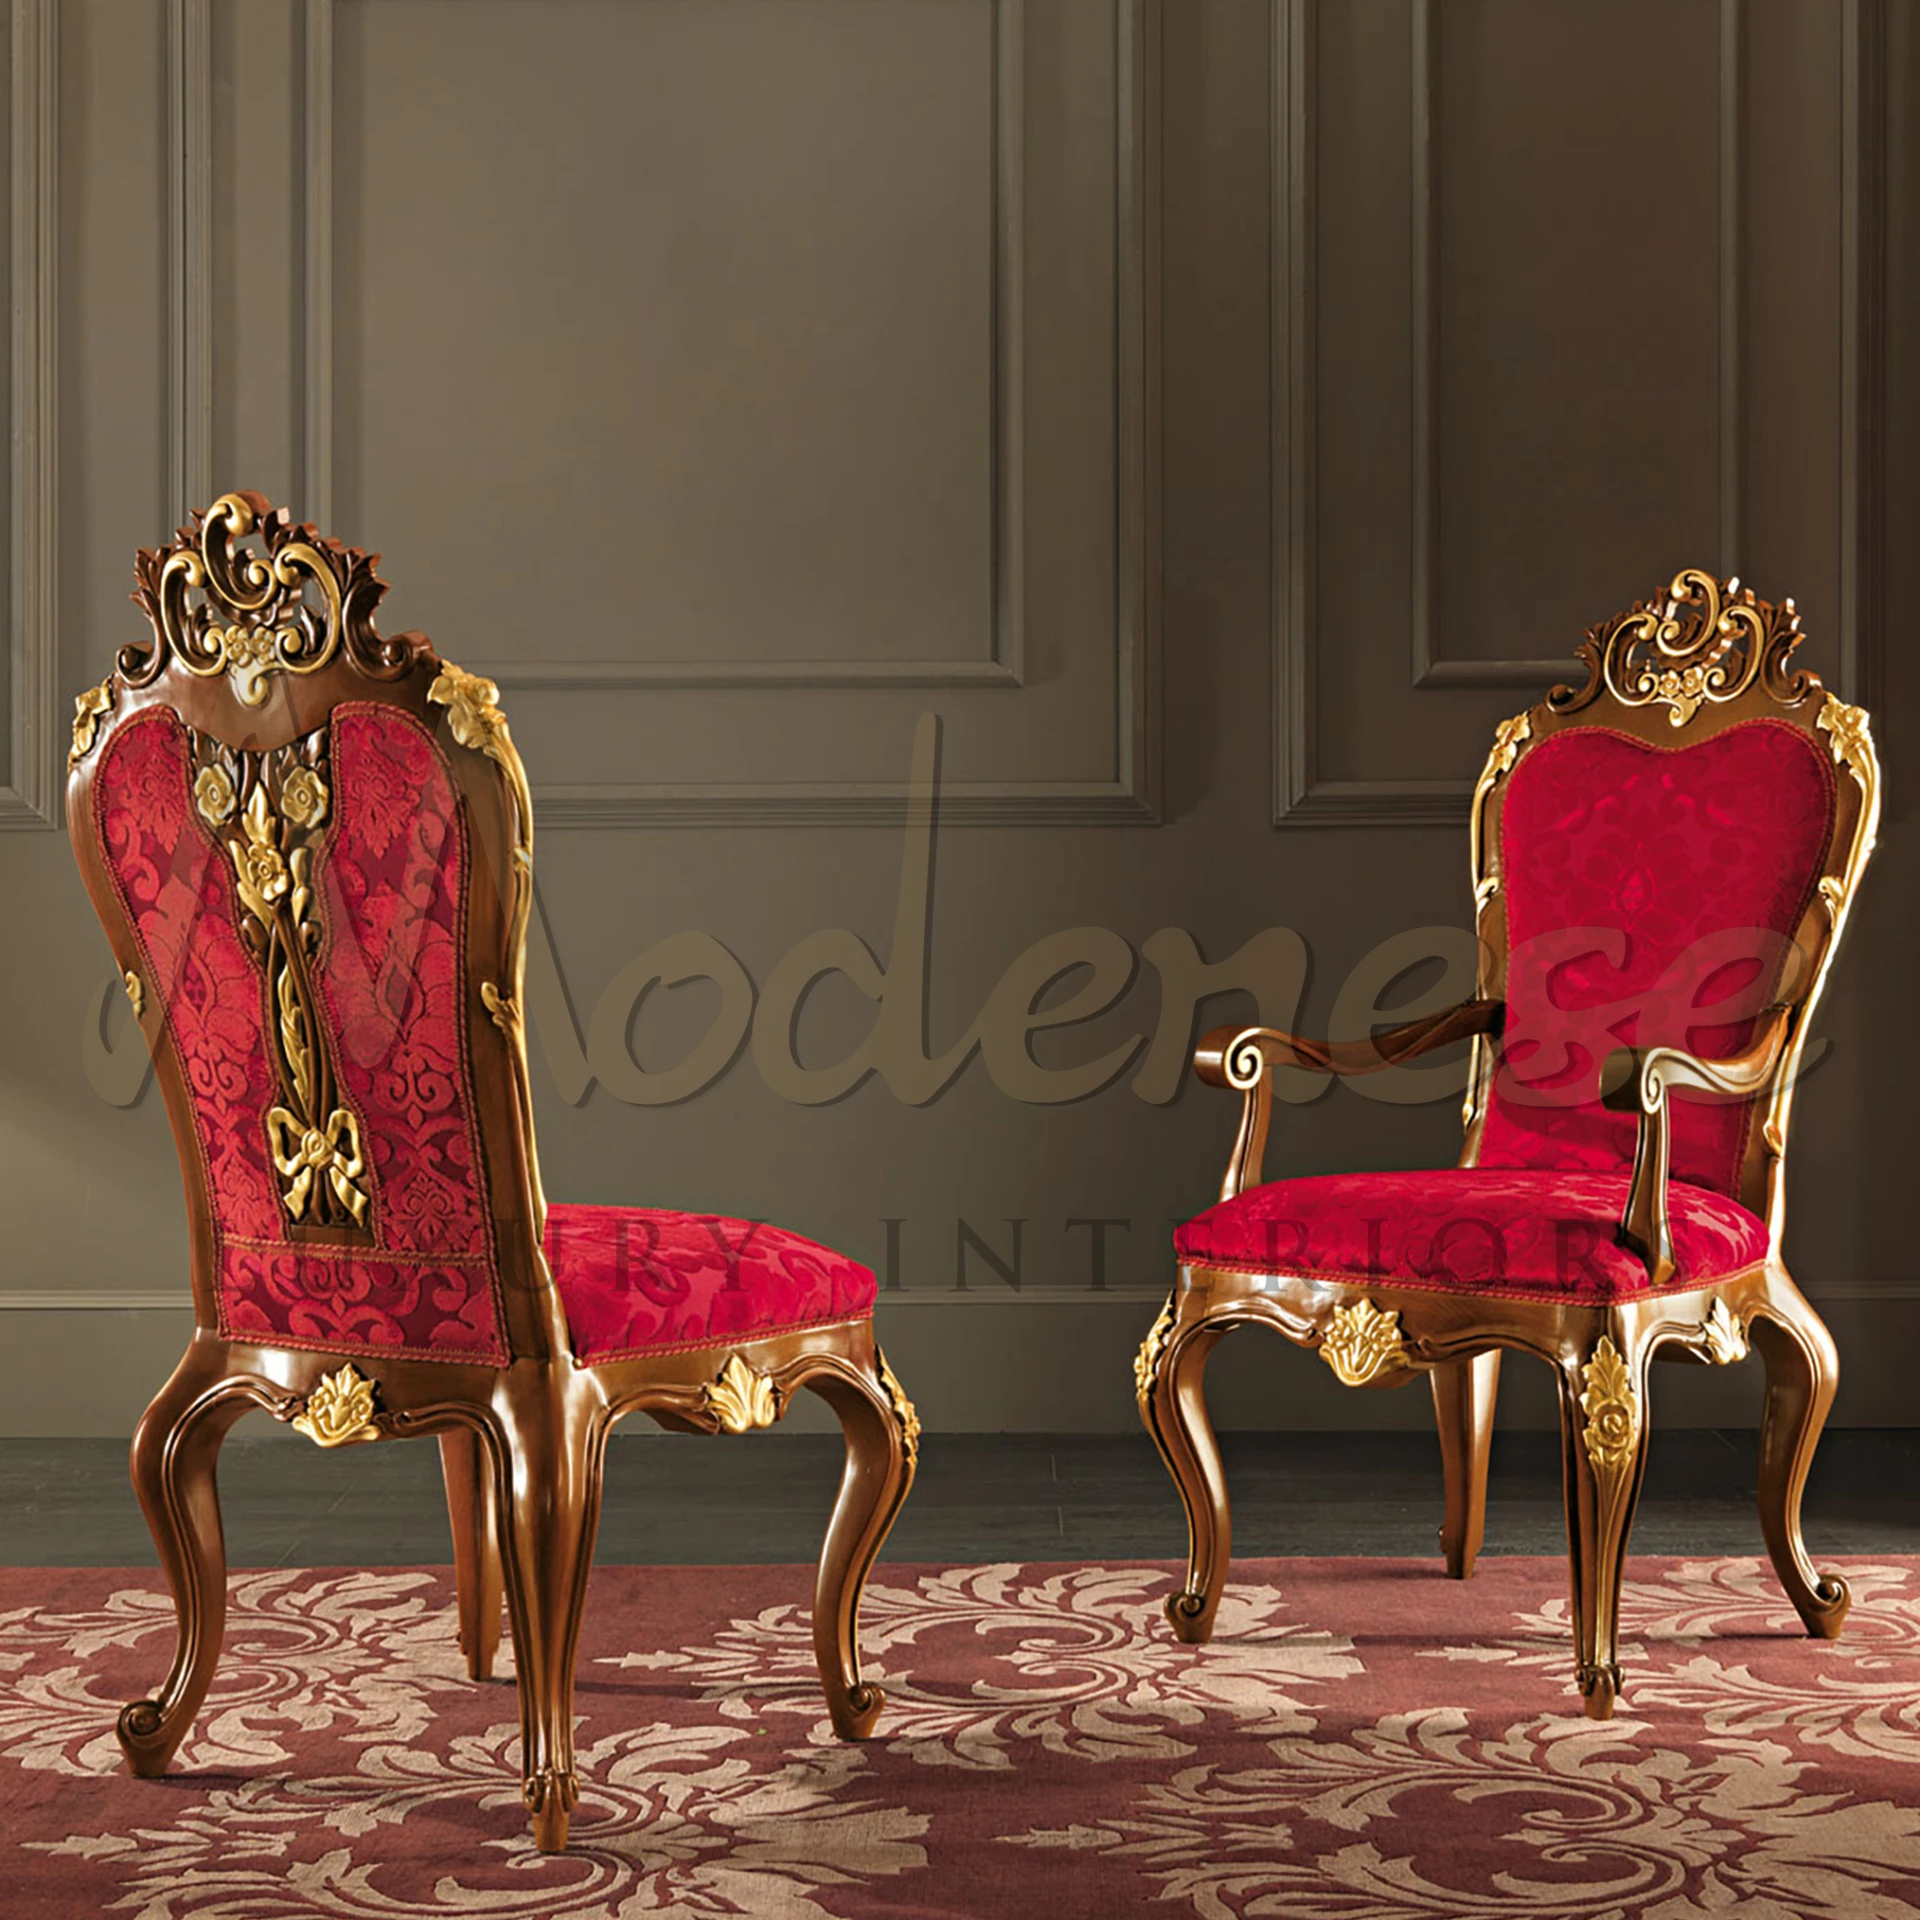 Turn heads with Modenese Furniture's baroque-style chair. Flamboyant upholstery and gold leaf carvings adorn its solid curved wood frame.